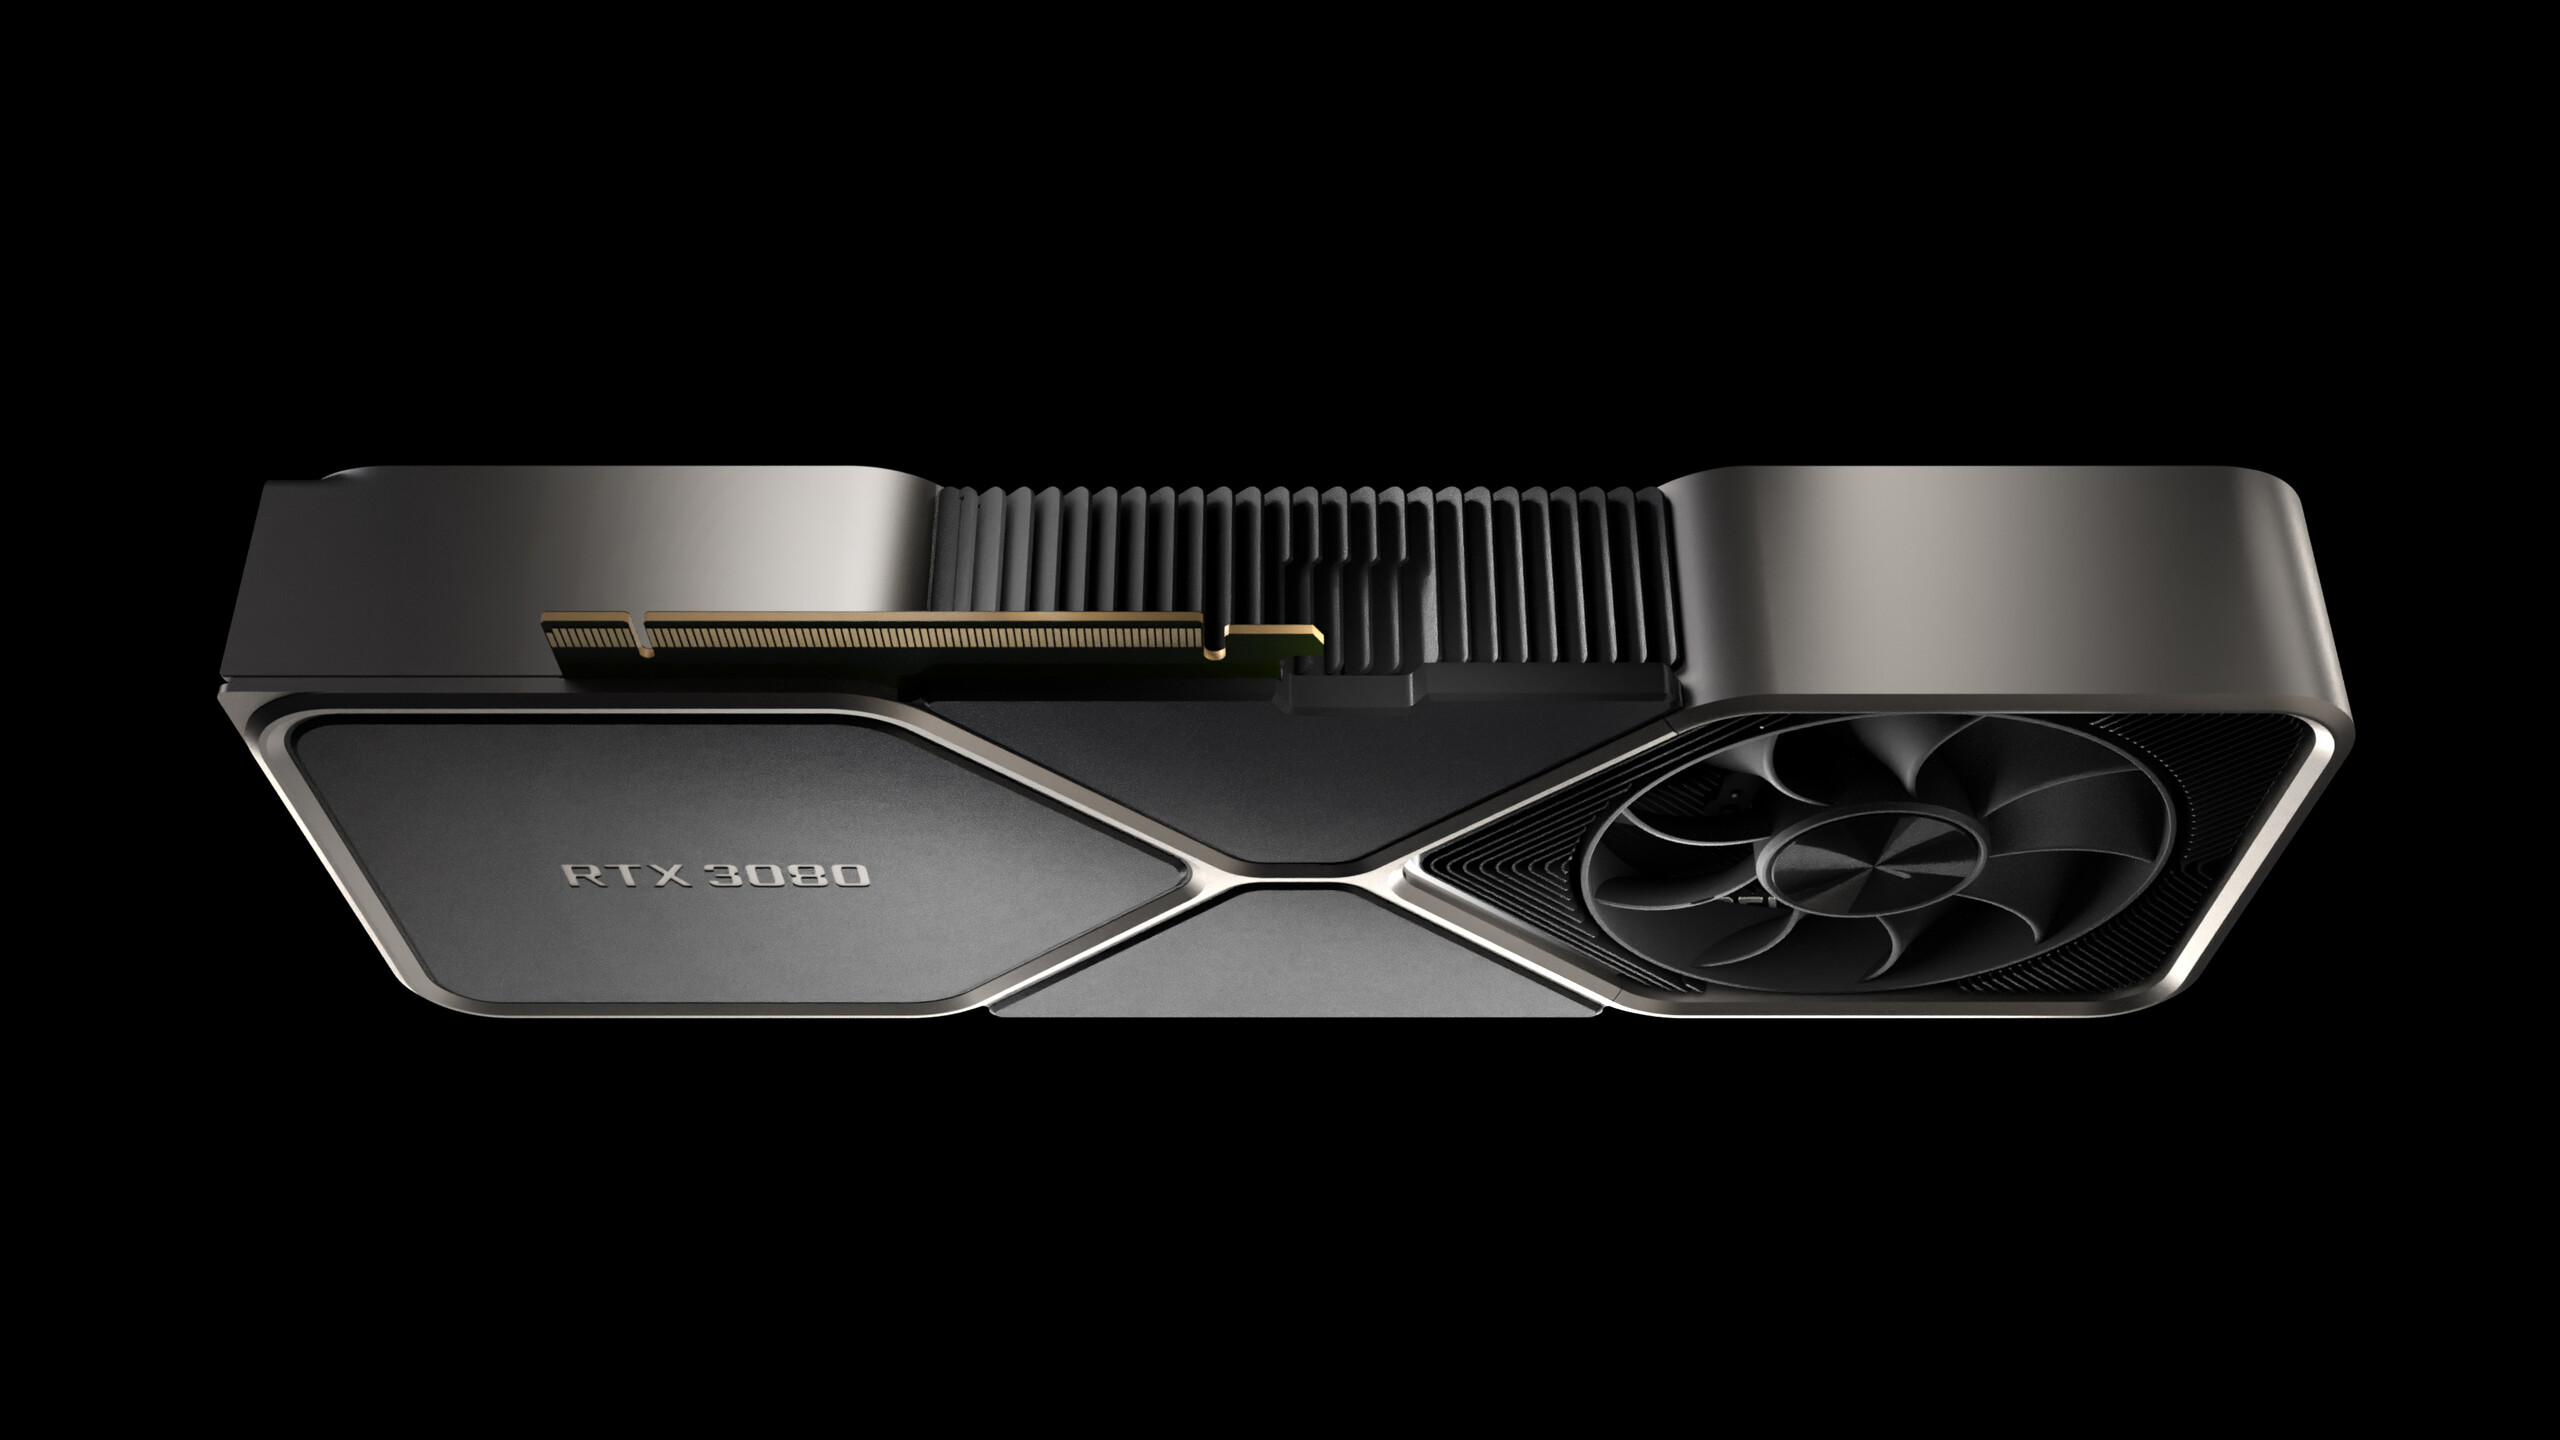 NVIDIA GeForce RTX 3050, RTX 3050 Ti and a new RTX 3080 with 12 GB VRAM are all in the pipeline - NotebookCheck.net News